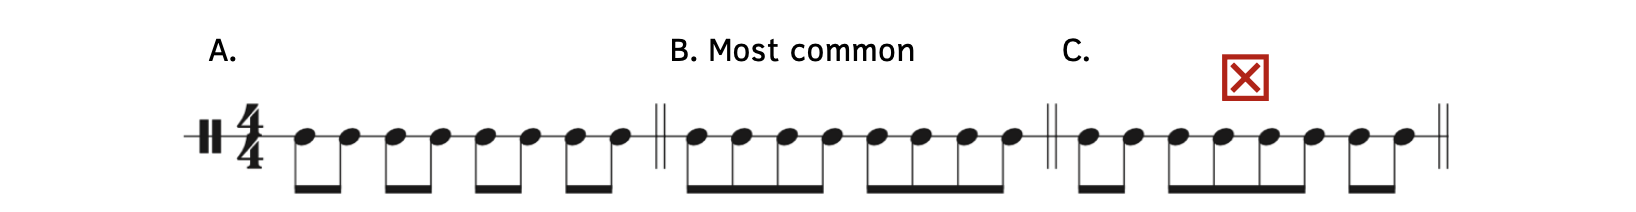 Correctly and incorrectly rhythm in 4/4. Example A shows four sets of two beamed eighth notes, which is acceptable. Example B shows two sets of four beamed eighth notes, which is more common. Example C shows two eighth notes beamed together, then four eighth notes beamed together, and two eighth notes beamed together, which is incorrect.